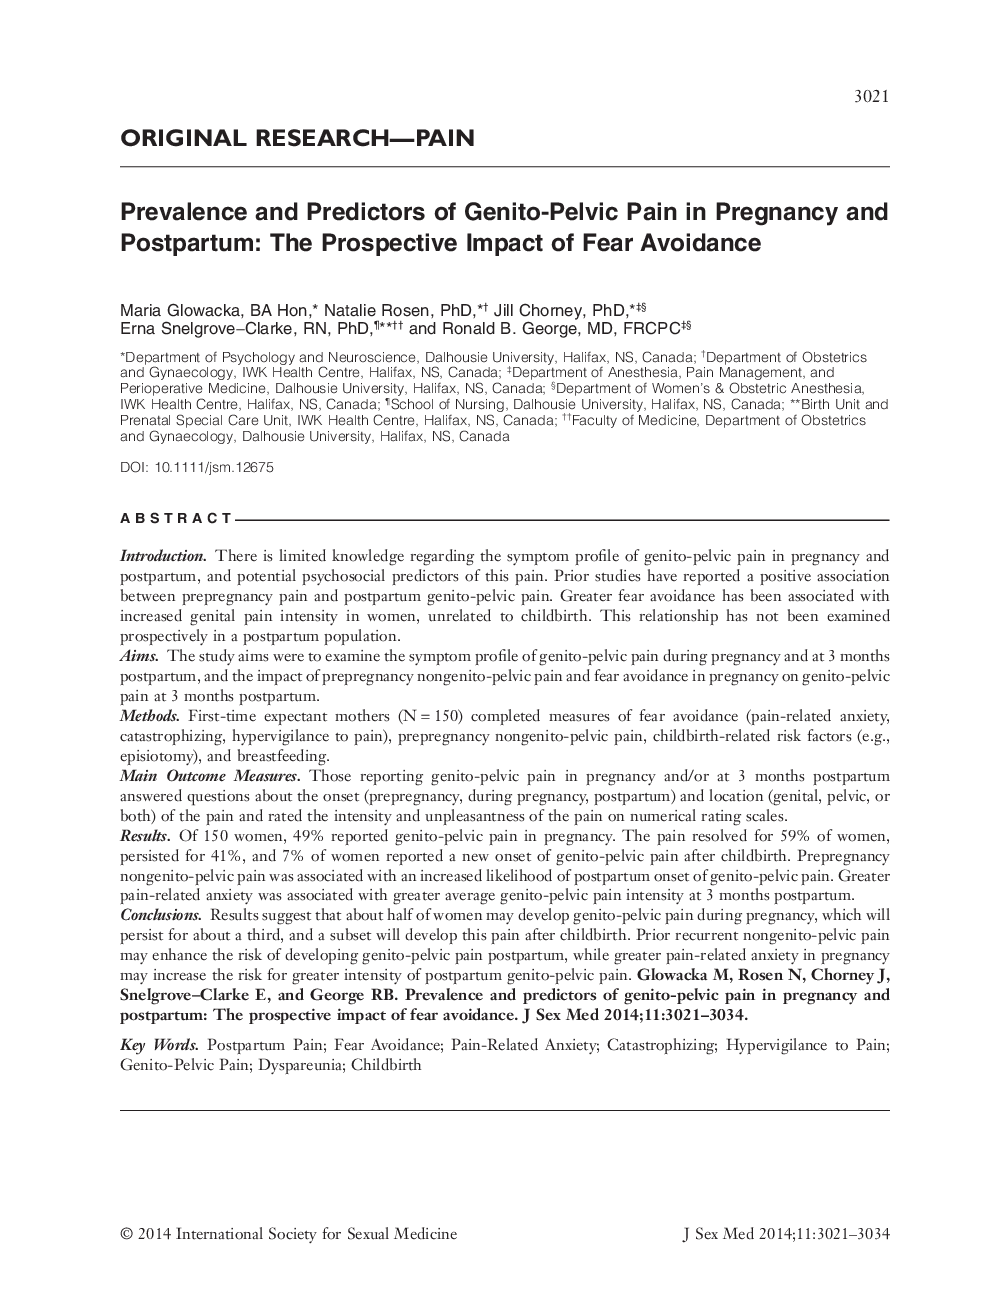 Prevalence and Predictors of Genito-Pelvic Pain in Pregnancy and Postpartum: The Prospective Impact of Fear Avoidance